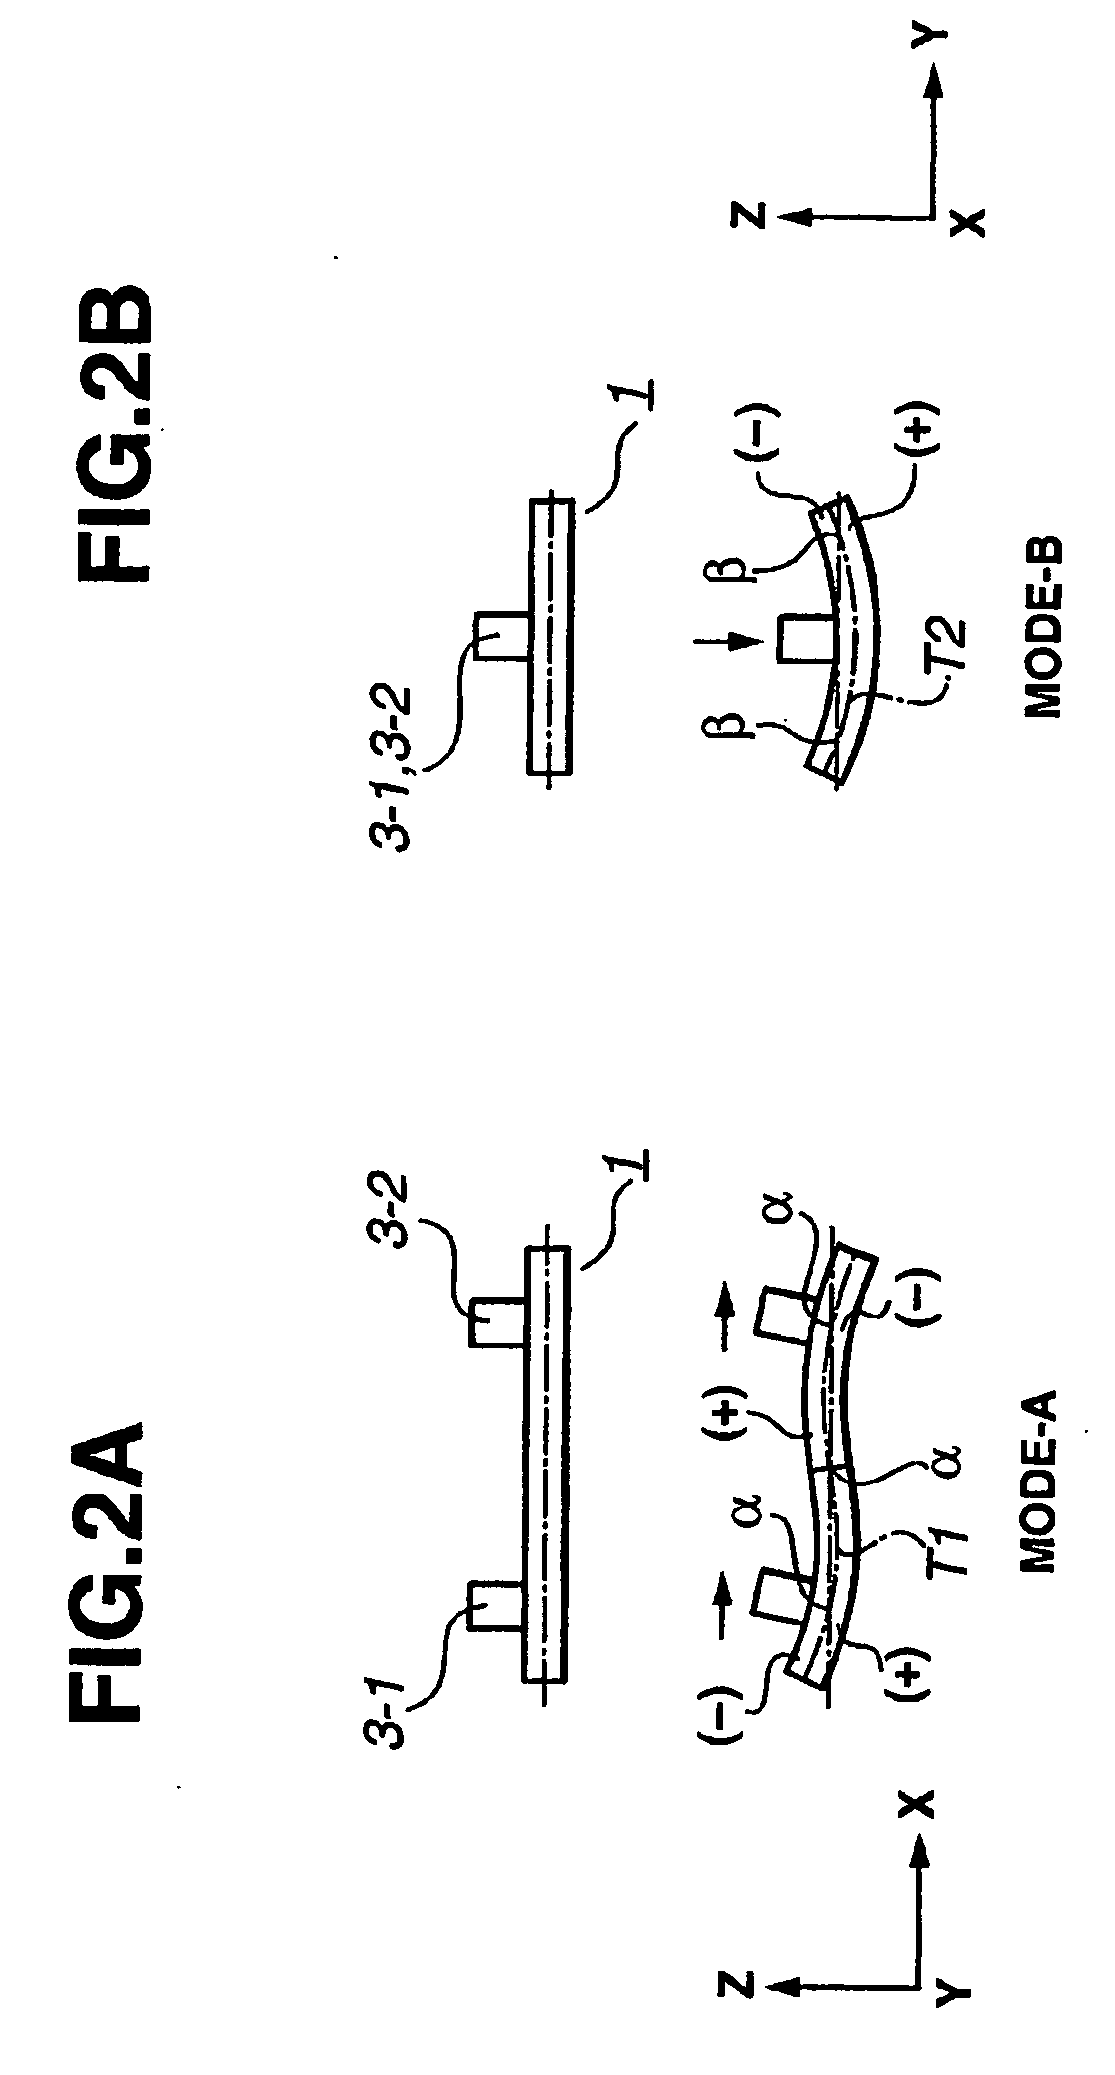 Vibration-type driving device, control apparatus for controlling the driving of the vibration-type driving device, and electronic equipment having the vibration-type driving device and the control apparatus